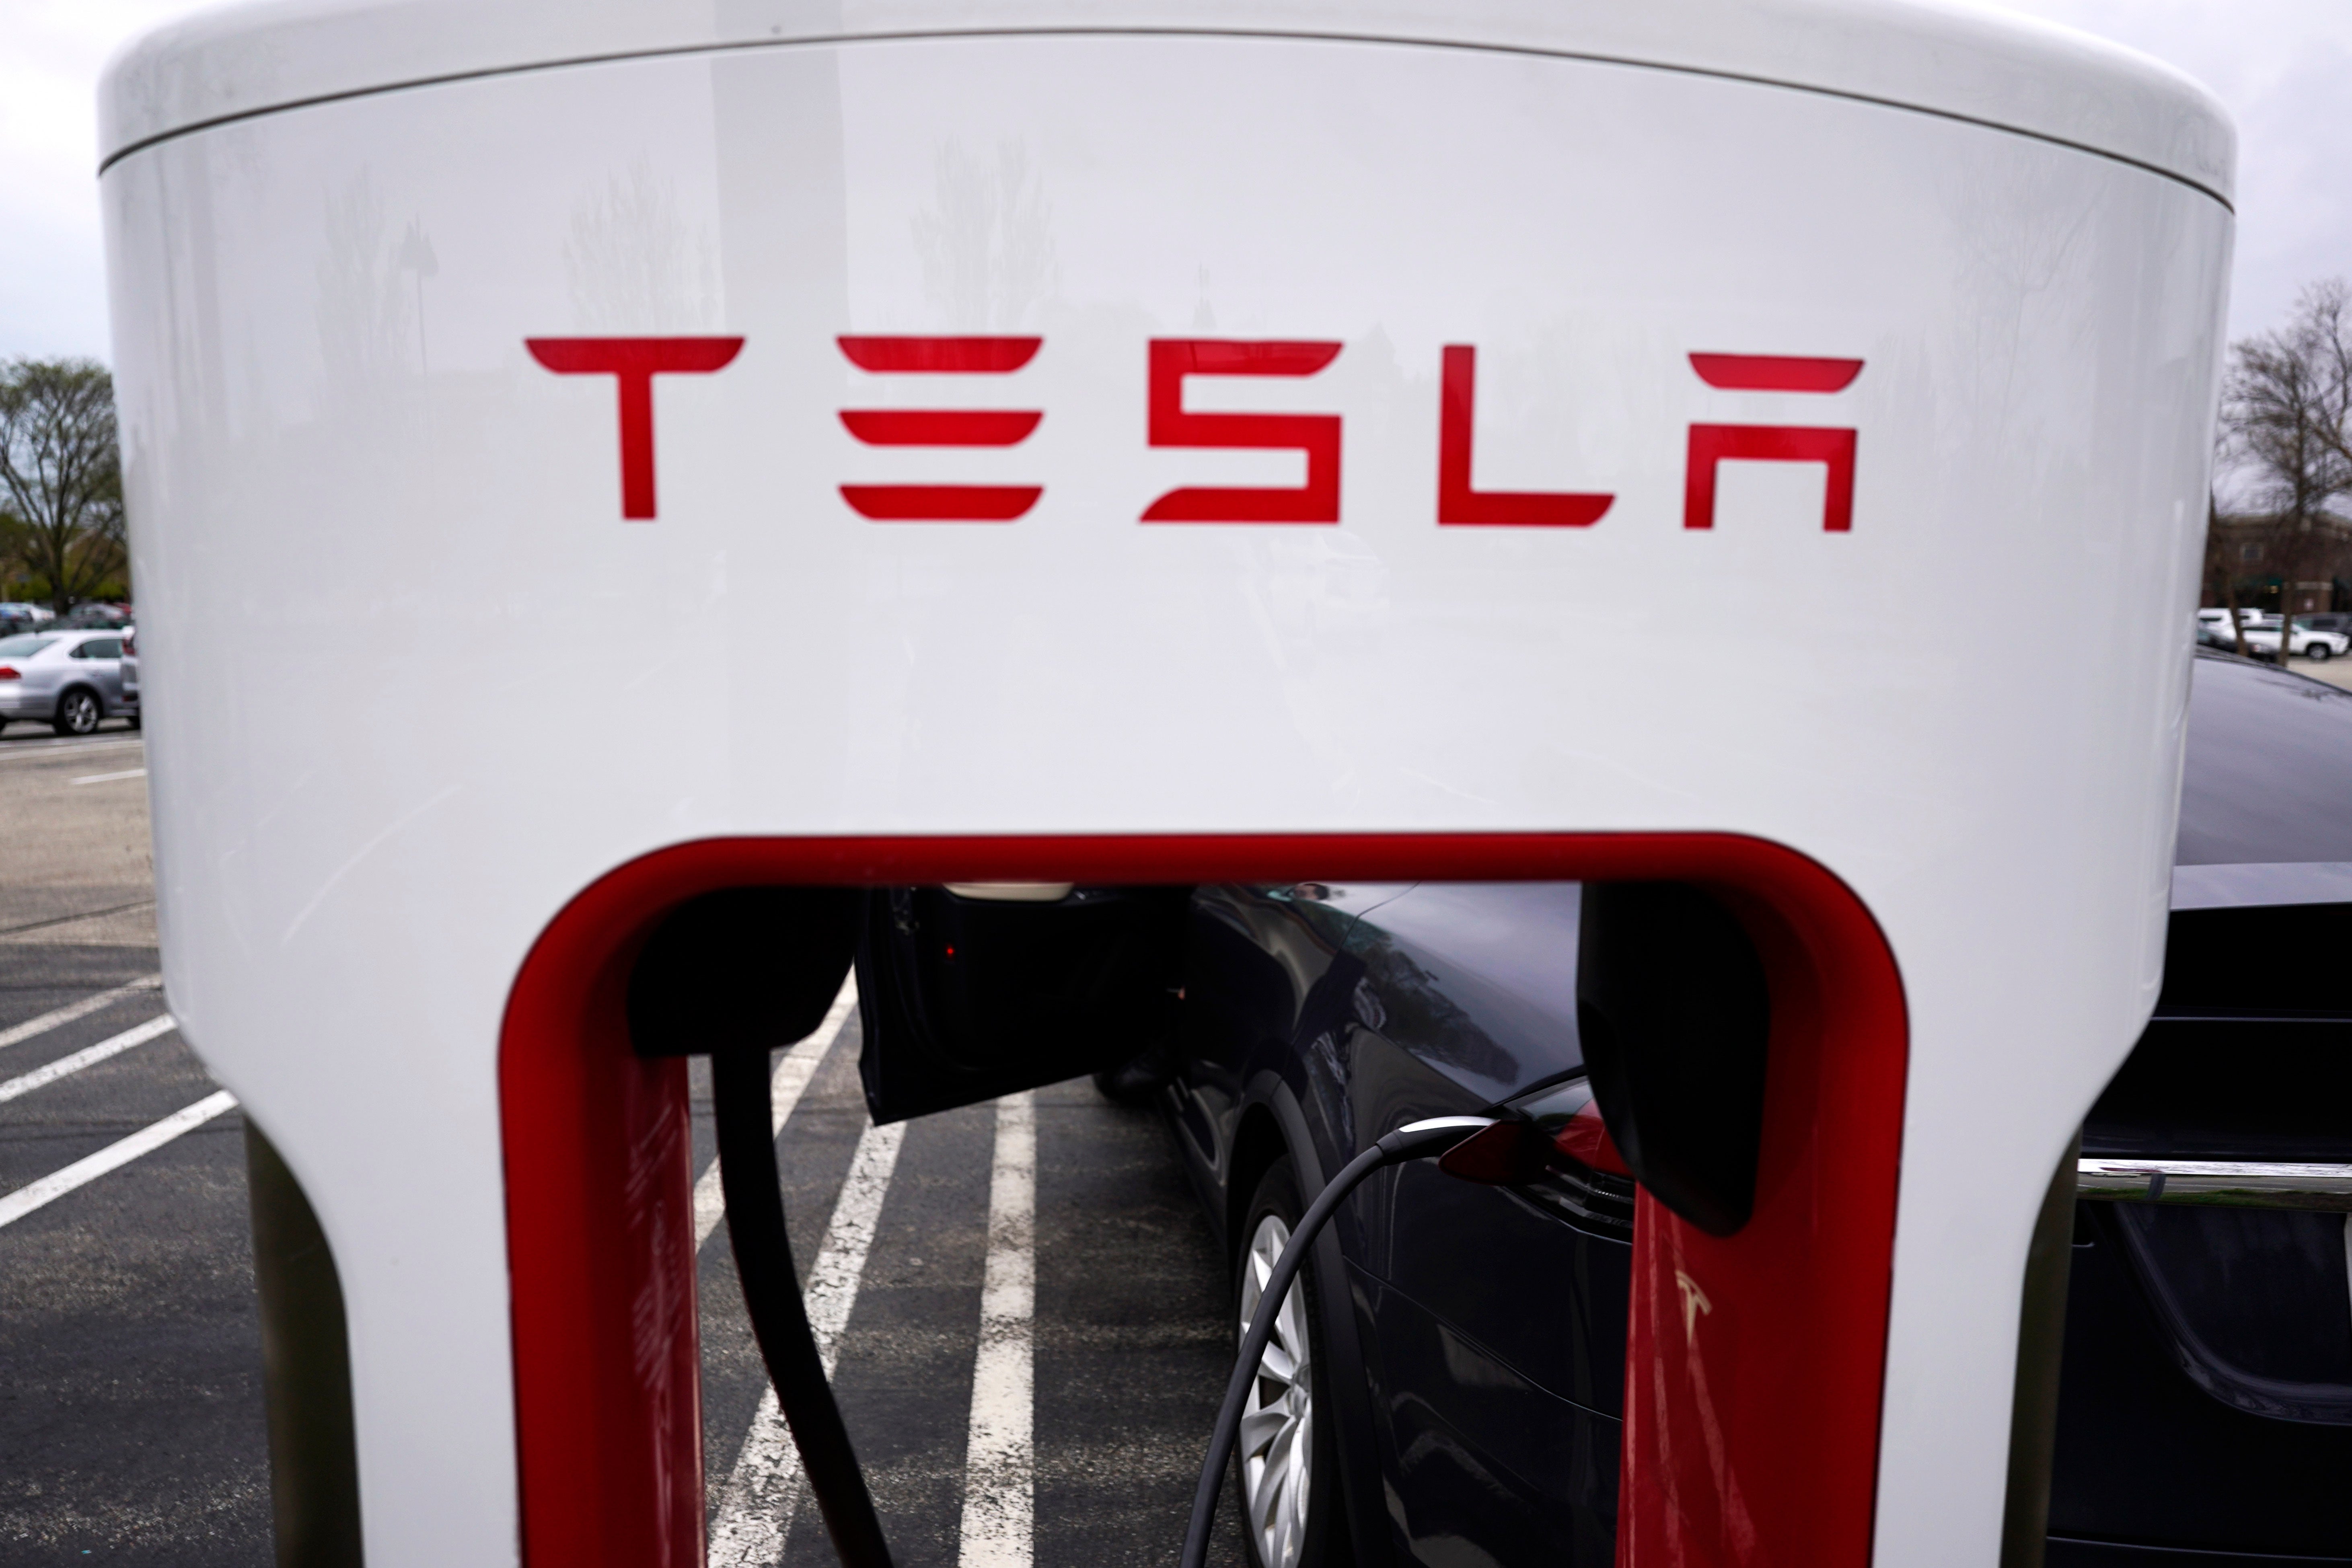 Competitors chip away at Tesla's U.S. electric vehicle share The